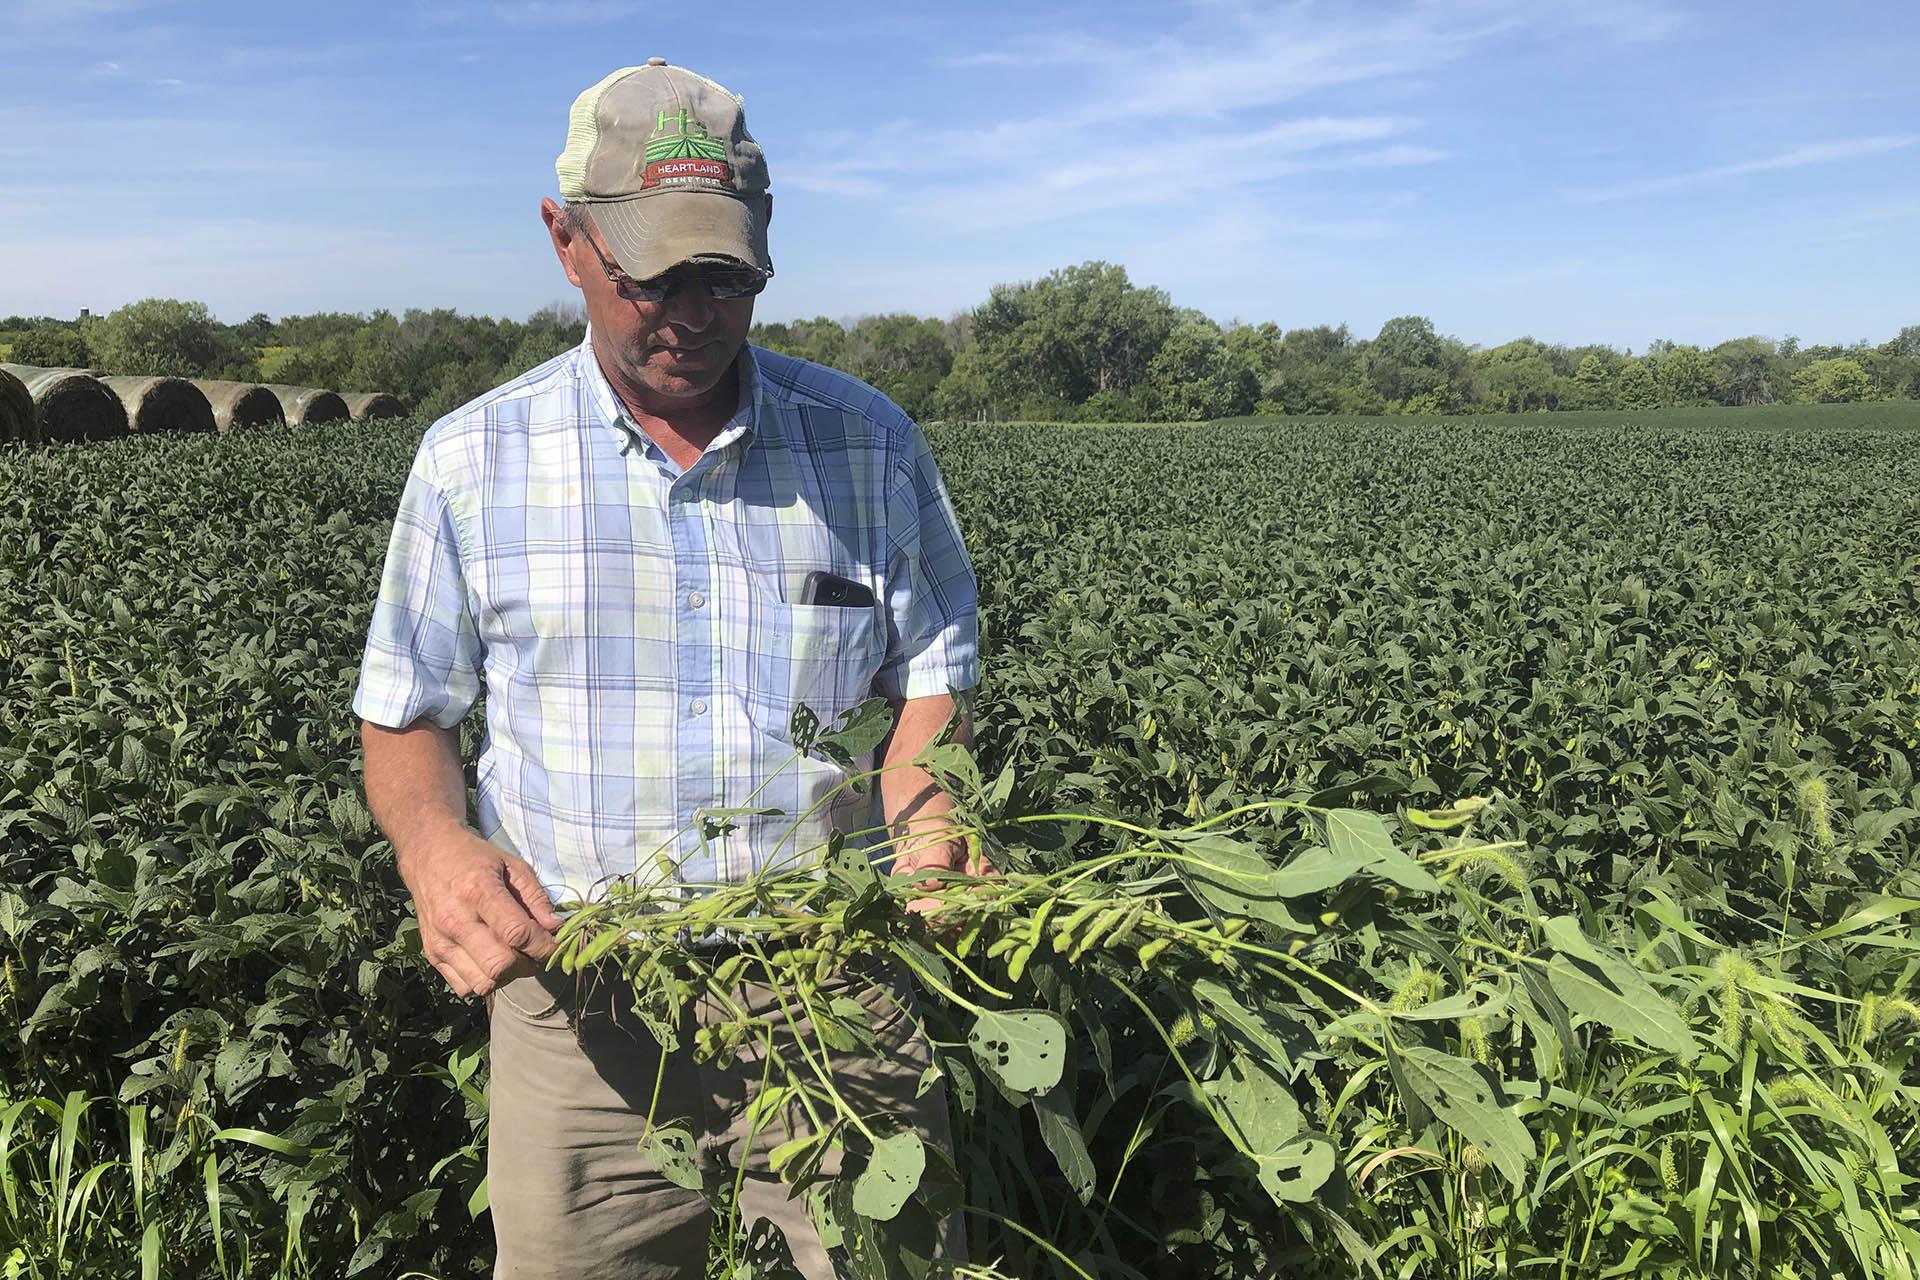 Farmer Randy Miller is shown with his soybeans, Thursday, Aug. 22, 2019, at his farm in Lacona, Iowa.  Miller, who also farms corn, is among farmers unhappy with President Donald Trump over waivers granted to oil refineries that have sharply reduced demand for corn-based ethanol. Miller called it “our own country stabbing us in the back.” (AP Photo / Julie Pace)